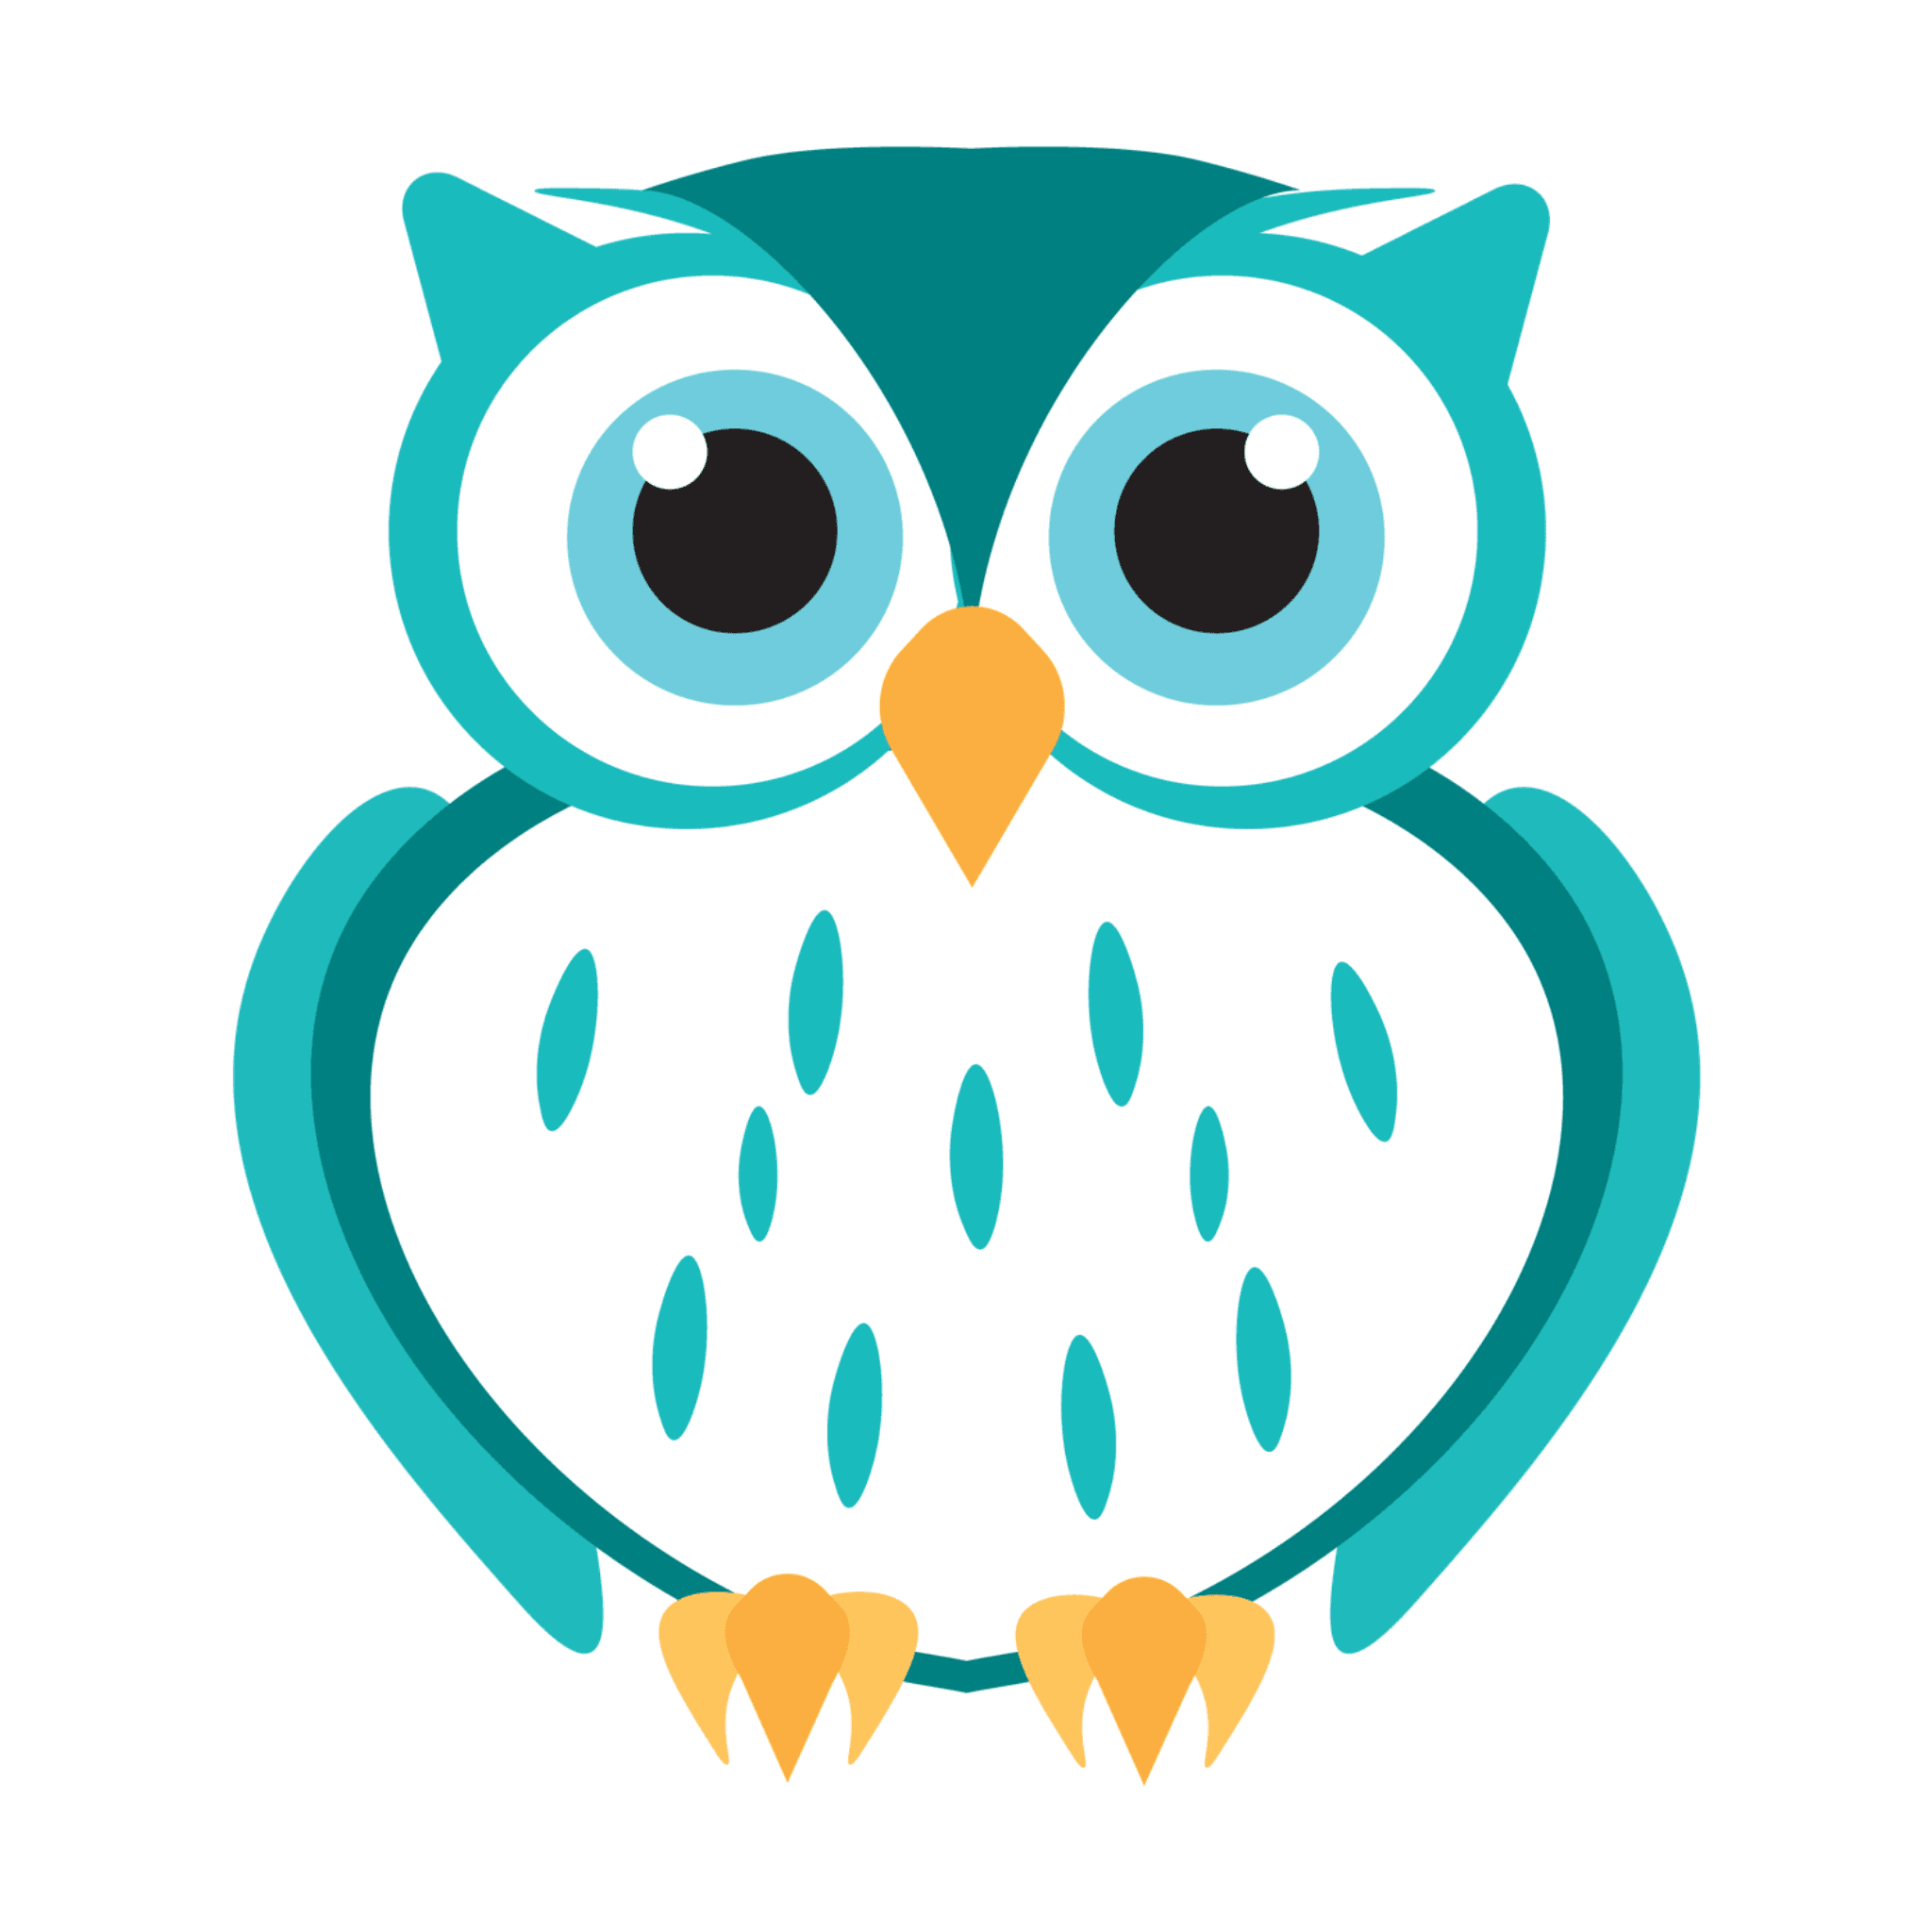 Ether Owl No. 3 - The Teal One